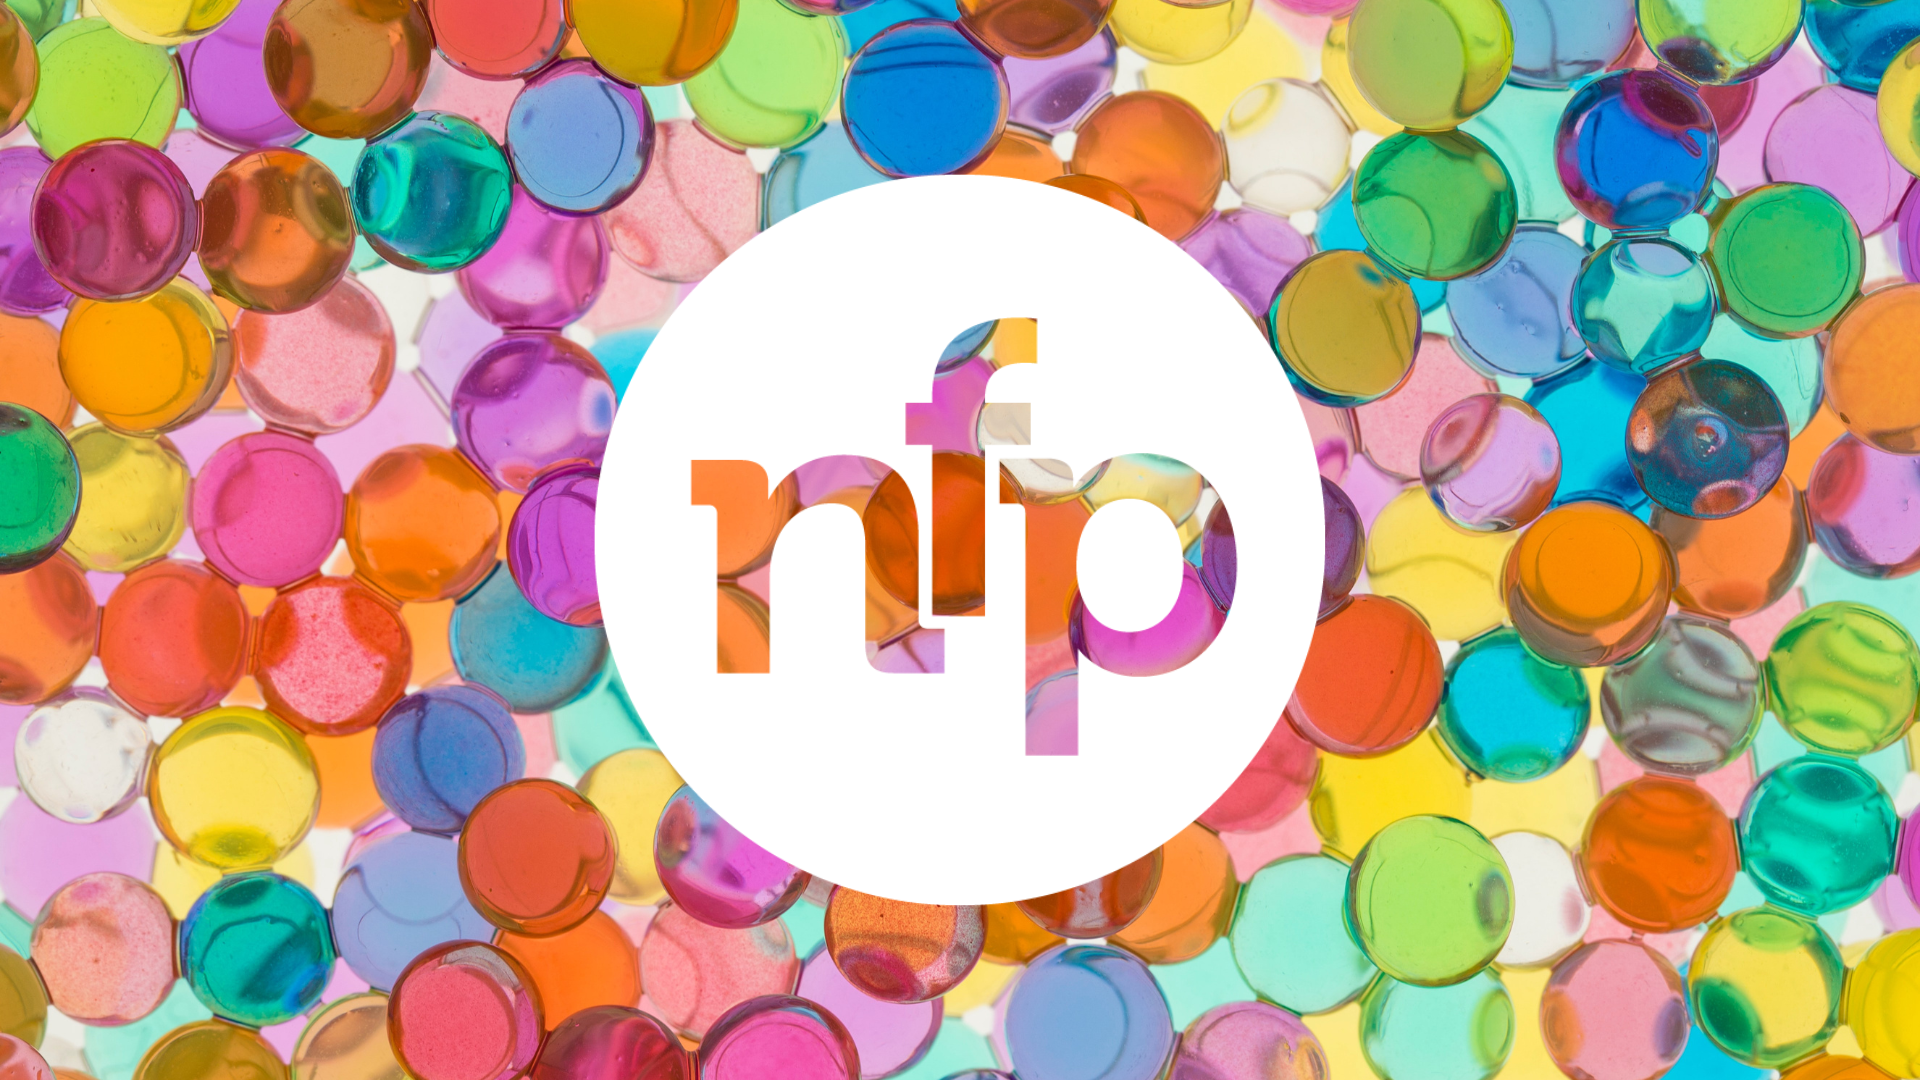 nfpresearch new logo in white set against colourful marbles